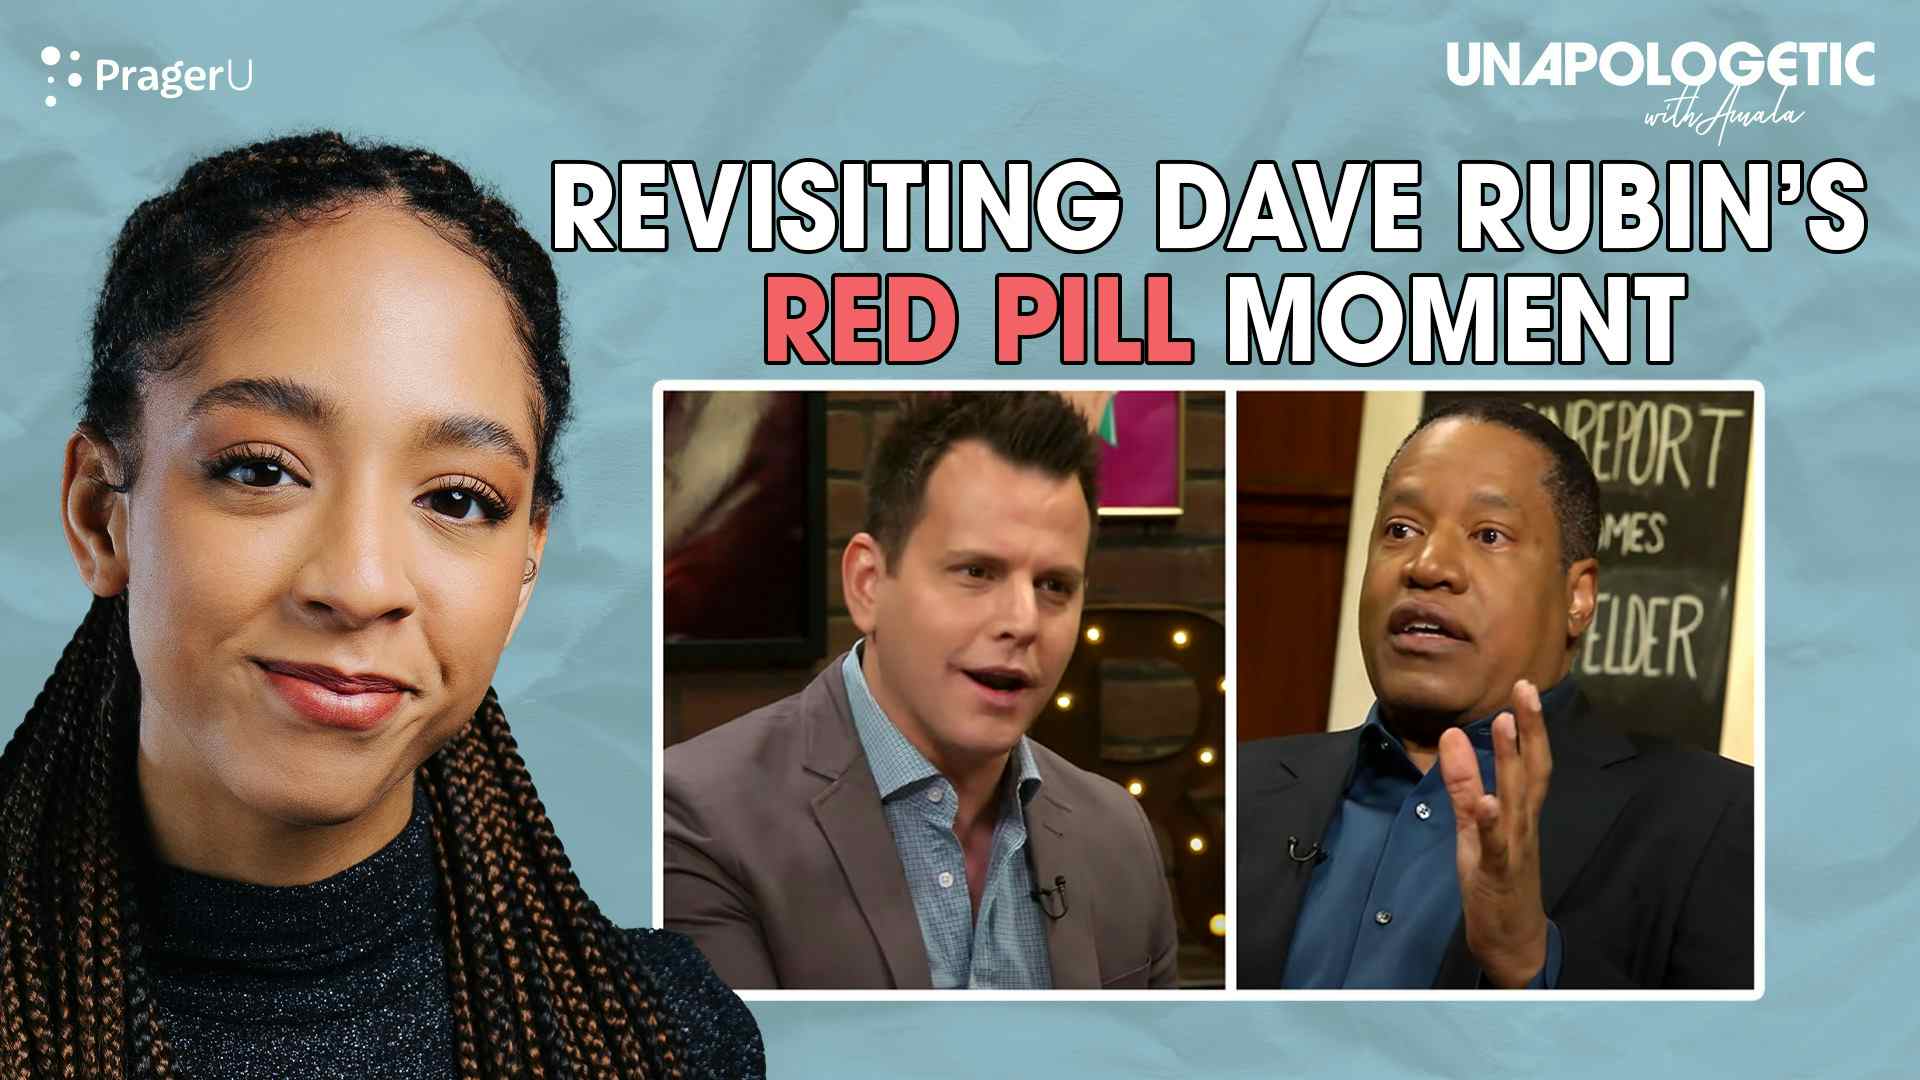 Revisiting That Viral Moment with Dave Rubin and Larry Elder: 9/29/2022